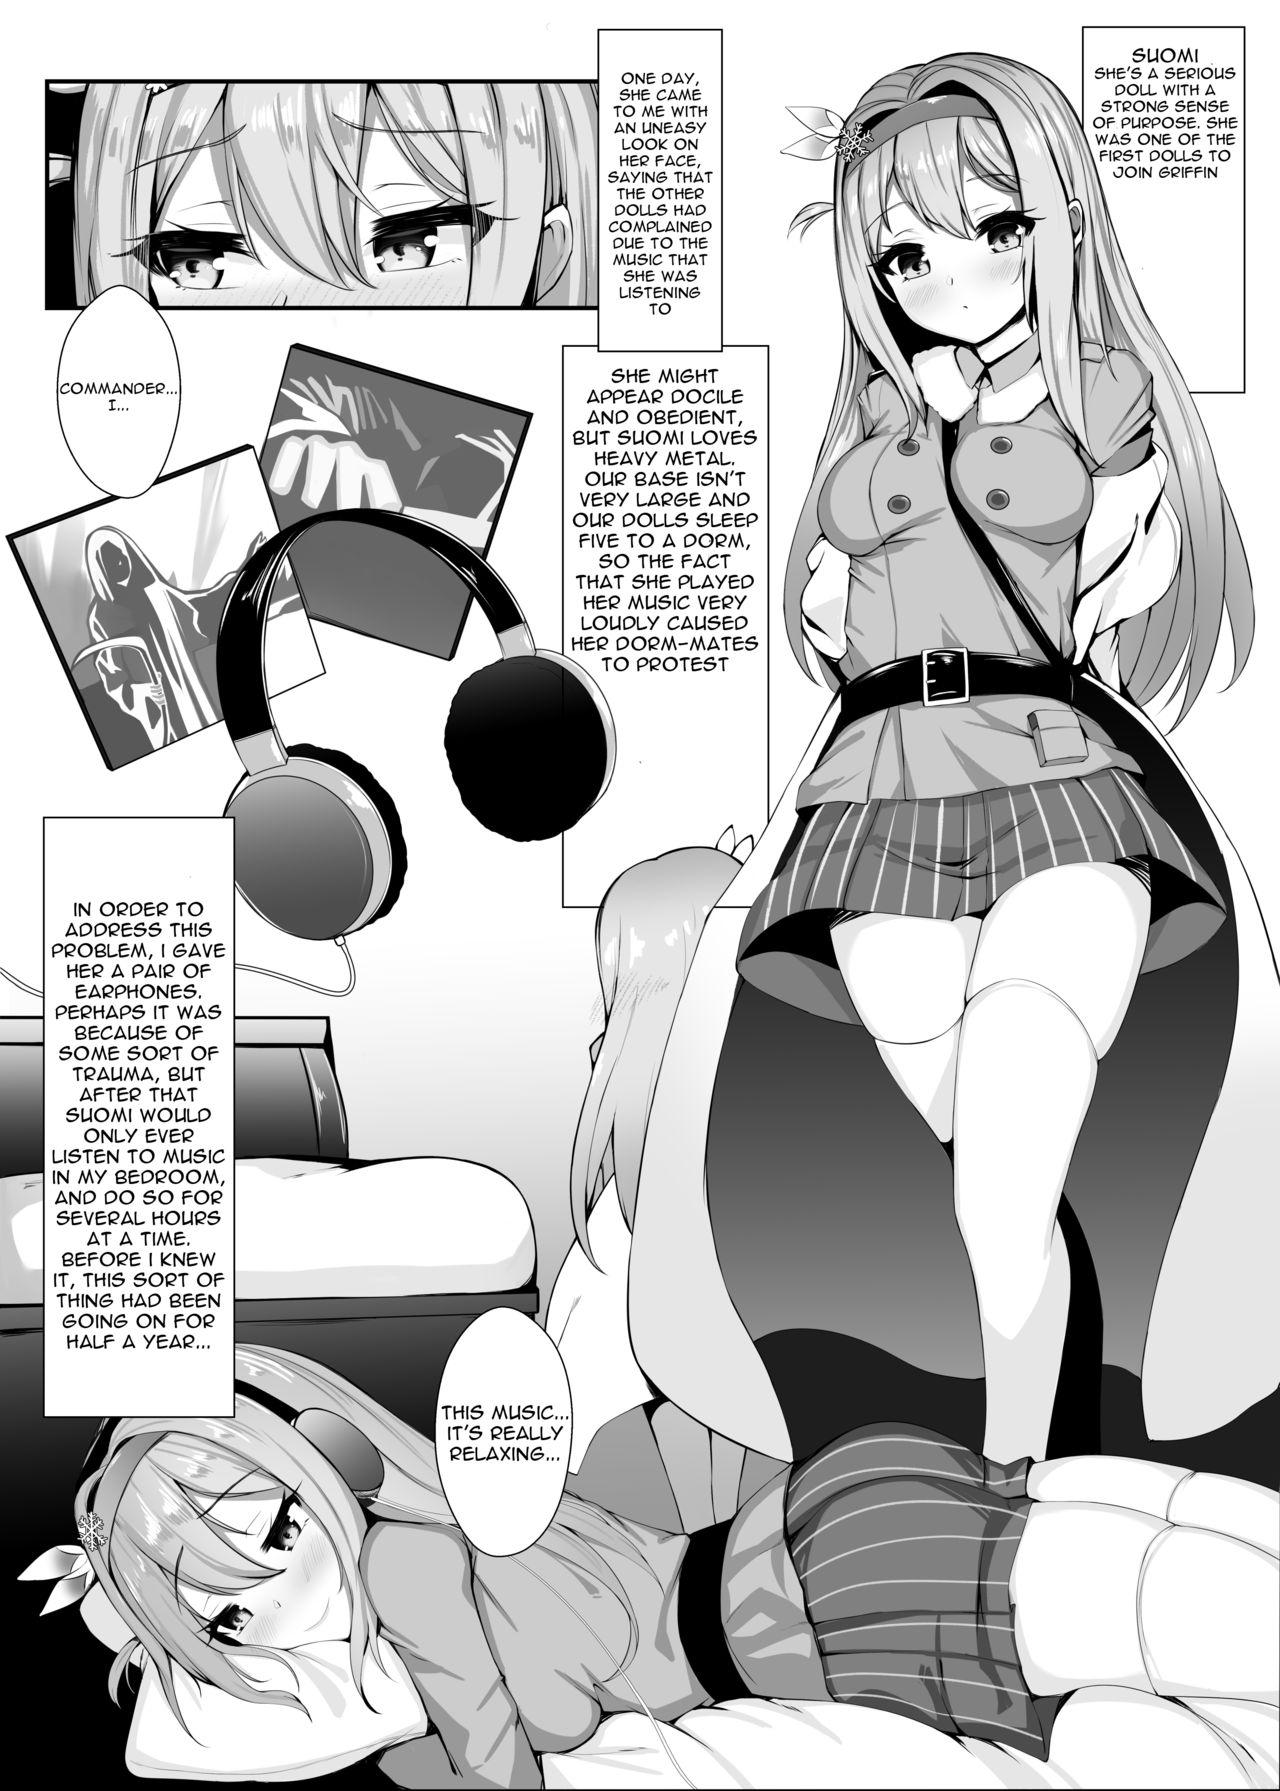 Soapy Massage Suomi - Mission of Love - Girls frontline Awesome - Page 4